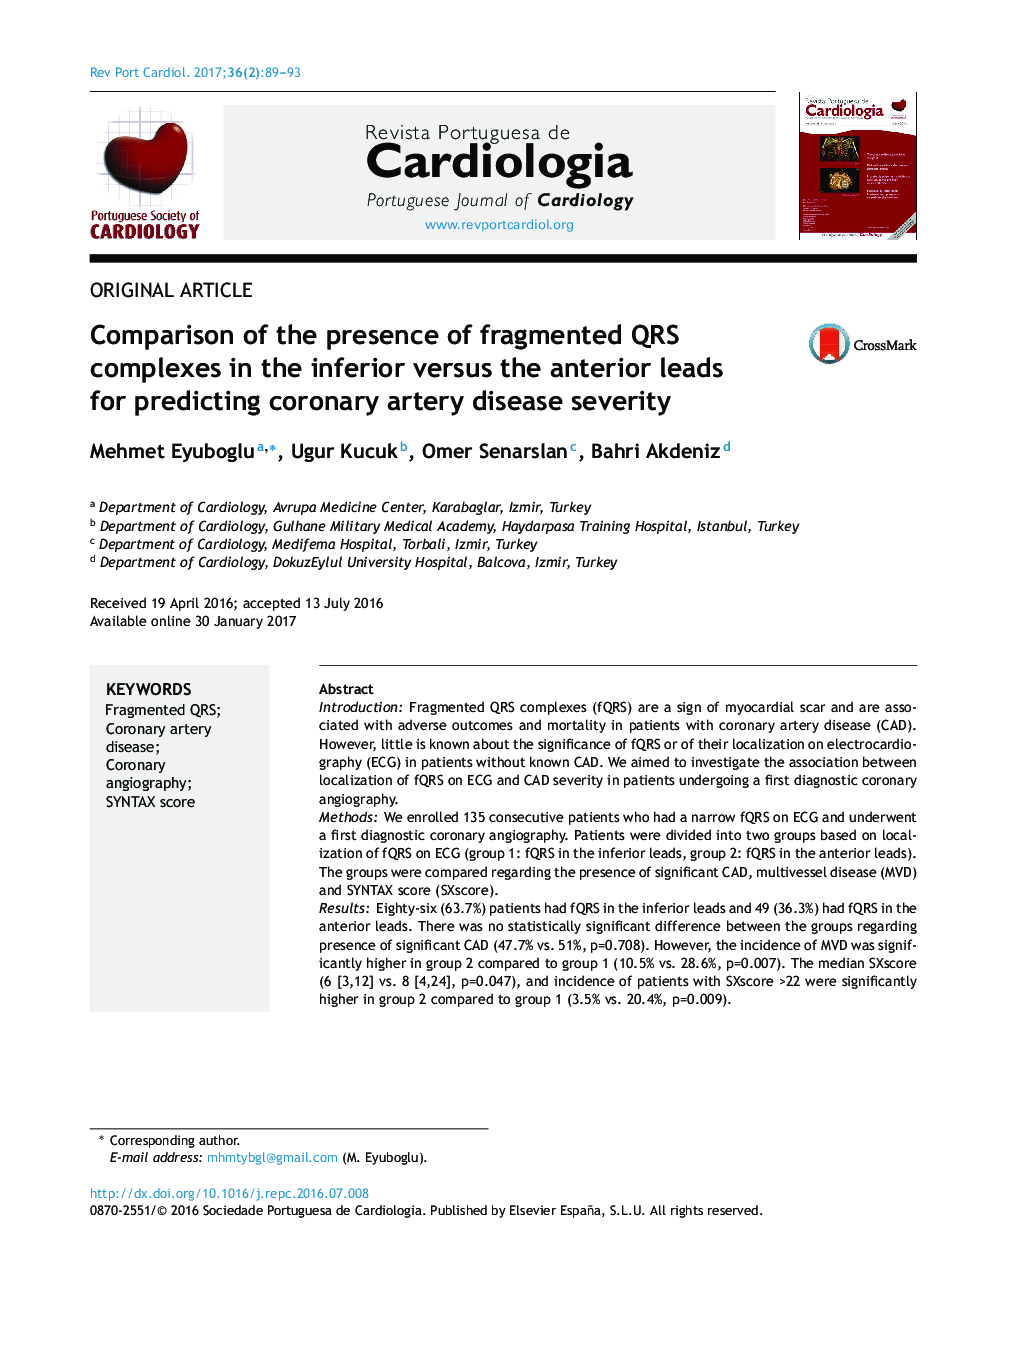 Comparison of the presence of fragmented QRS complexes in the inferior versus the anterior leads for predicting coronary artery disease severity